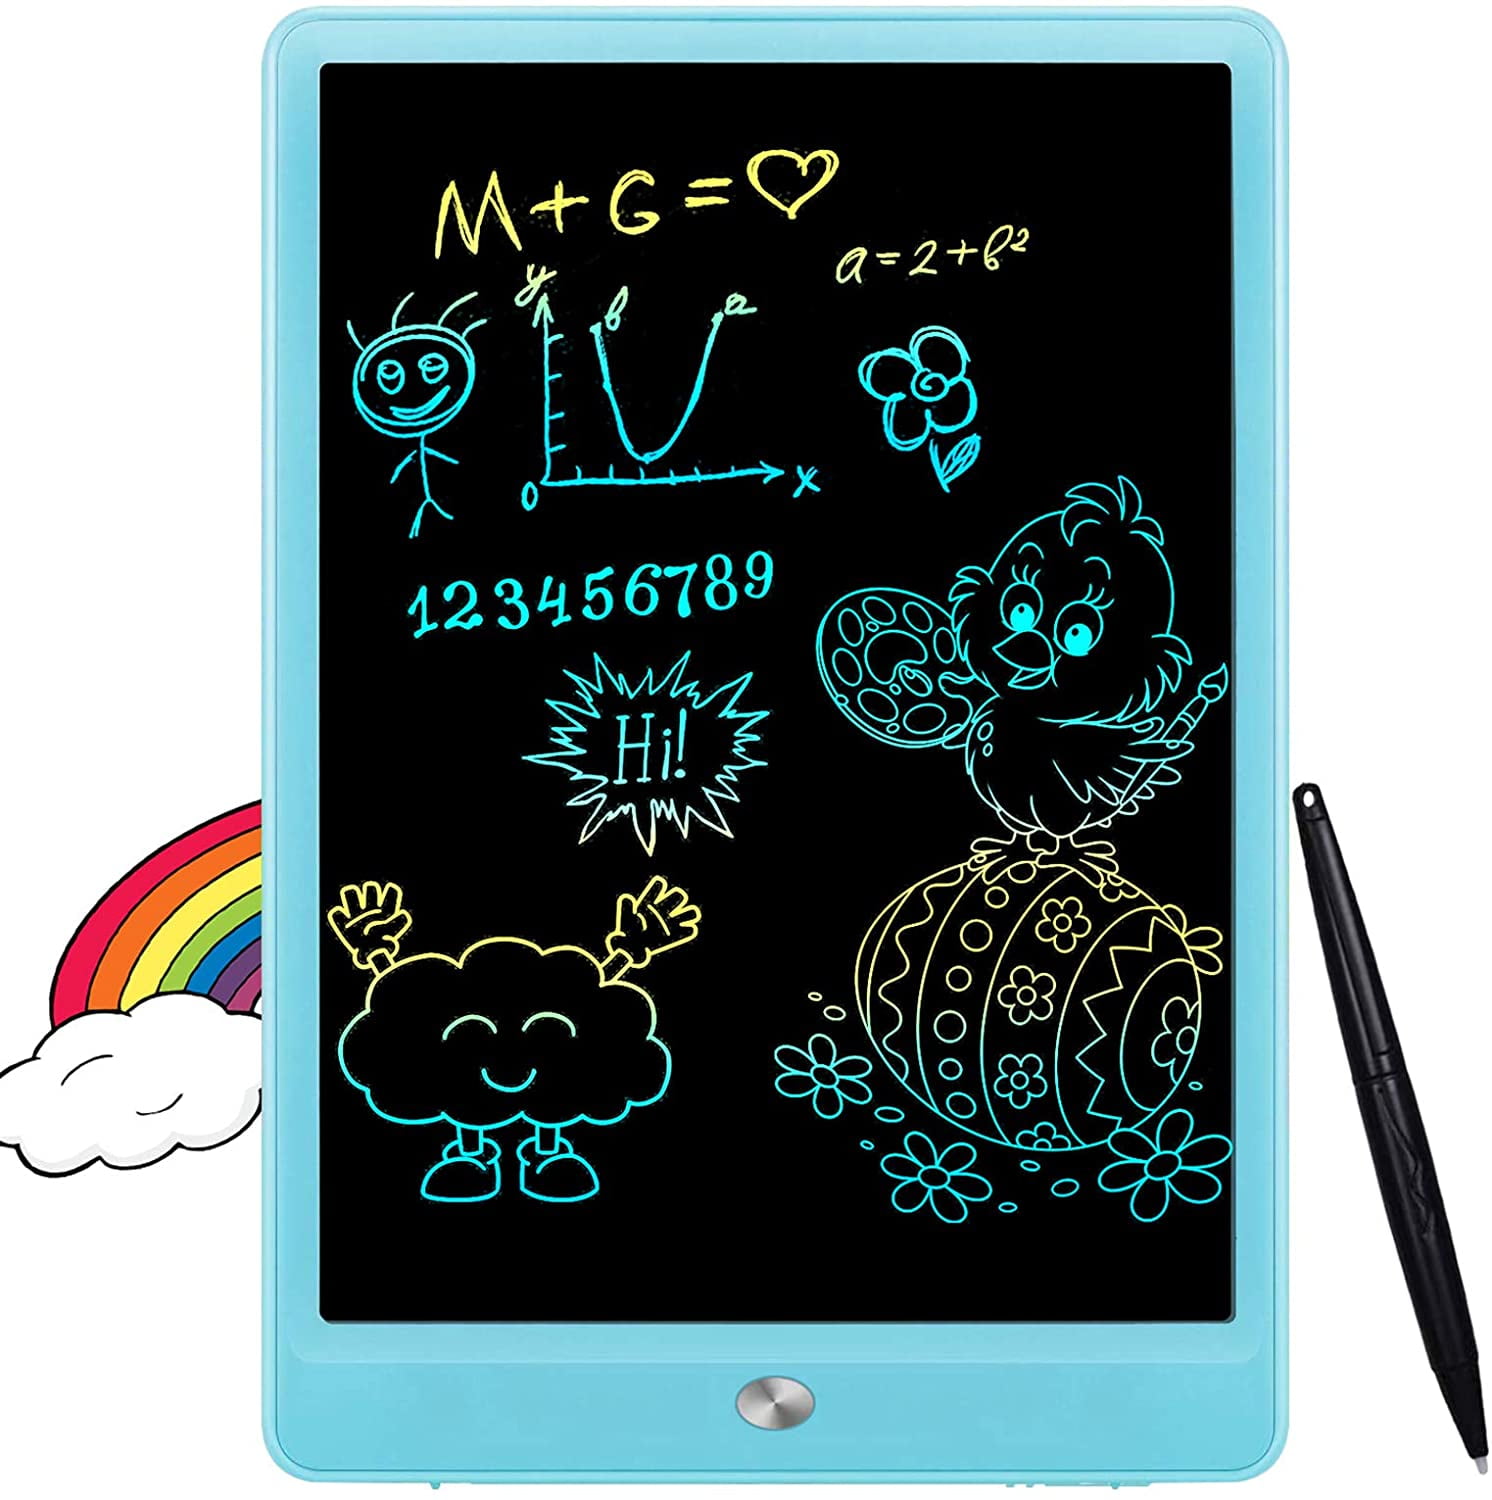 Partially Erasable and One-Click Delete Colorful Writing and Learning Drawing Scribble Board for Kids AFGADW 8.5 Inch LCD Waterproof Ultra-Thin and Drop-Resistant 